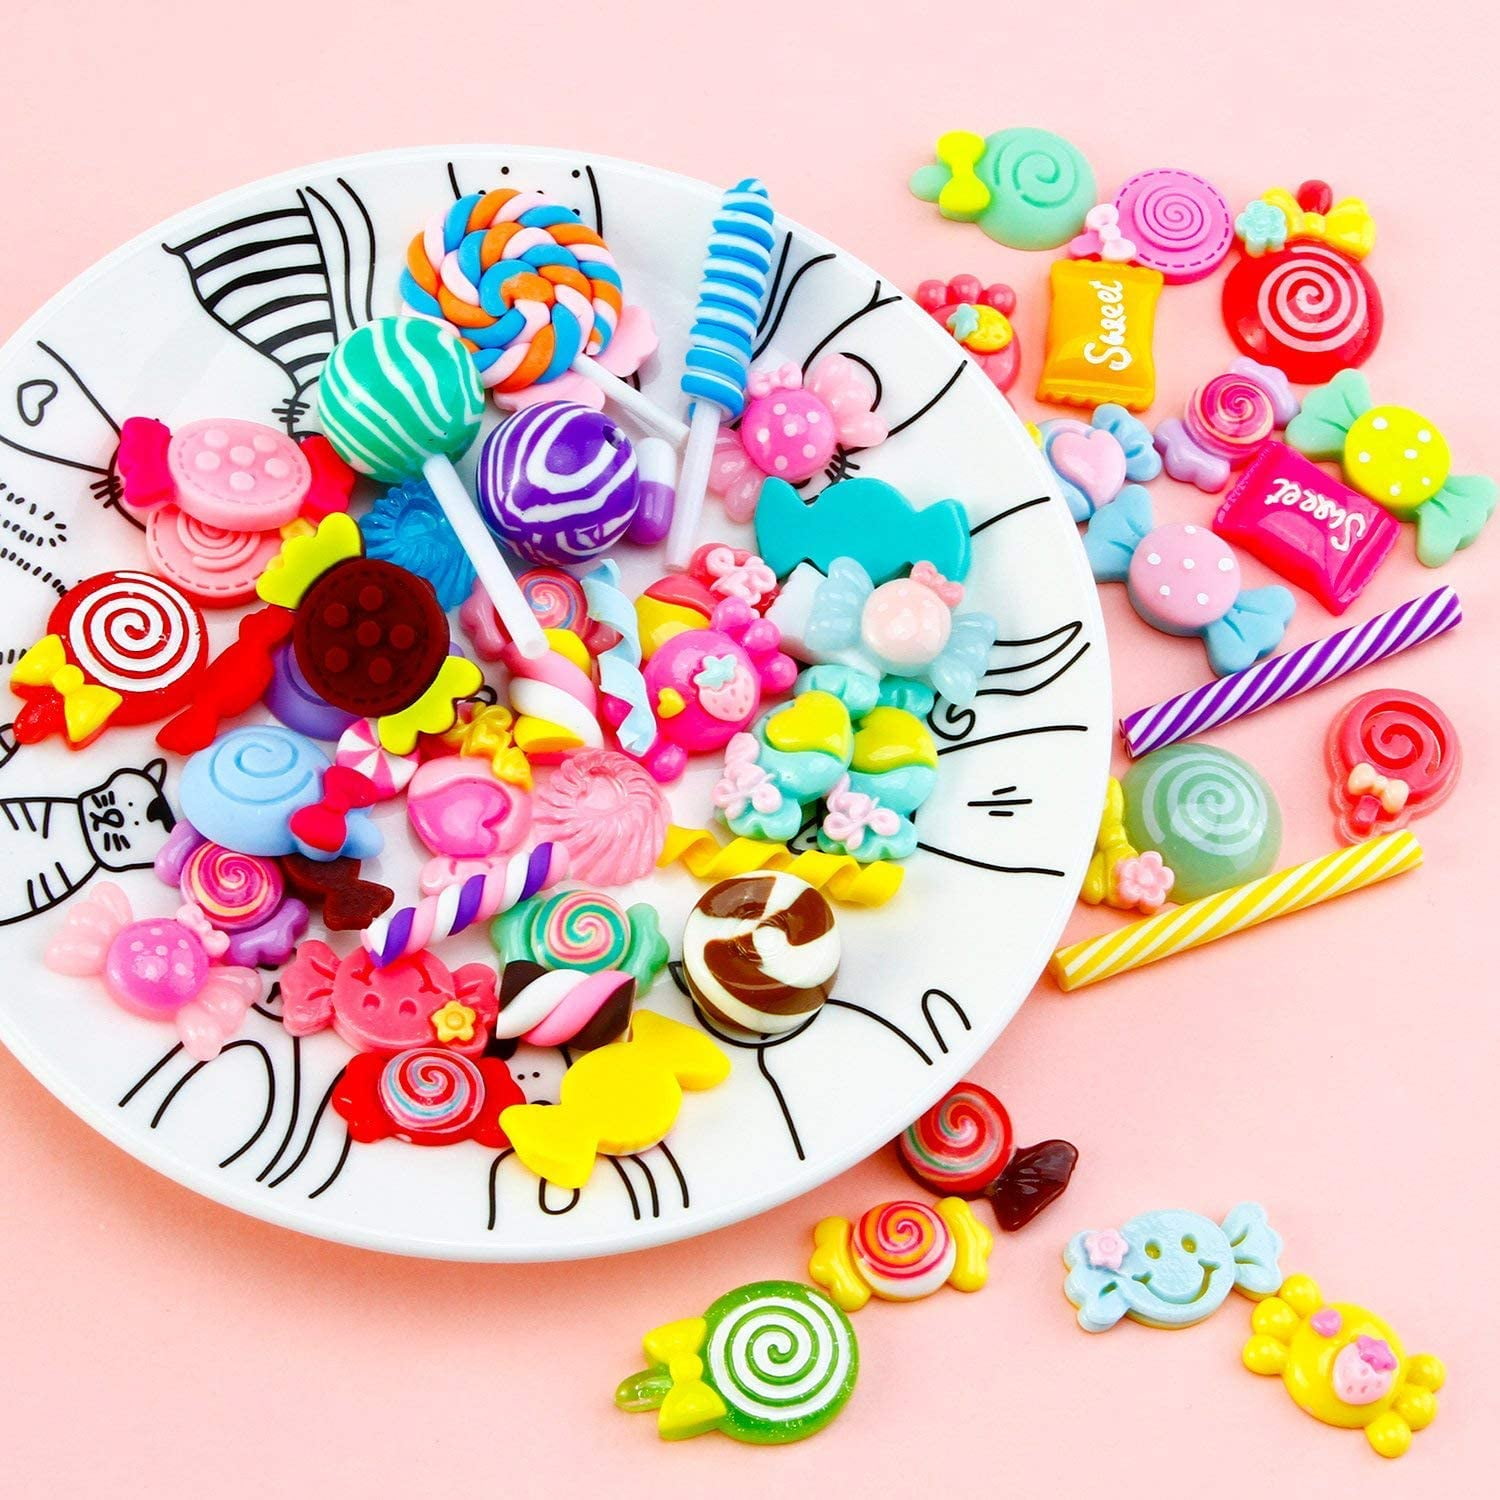 LiQunSweet 32 Pcs 16 Styles Chocolate Cream Color Cookies Wafer Biscuits  Charm Resin Bear Rabbit Popcorn Candy Flower Small Charms for Jewery Making